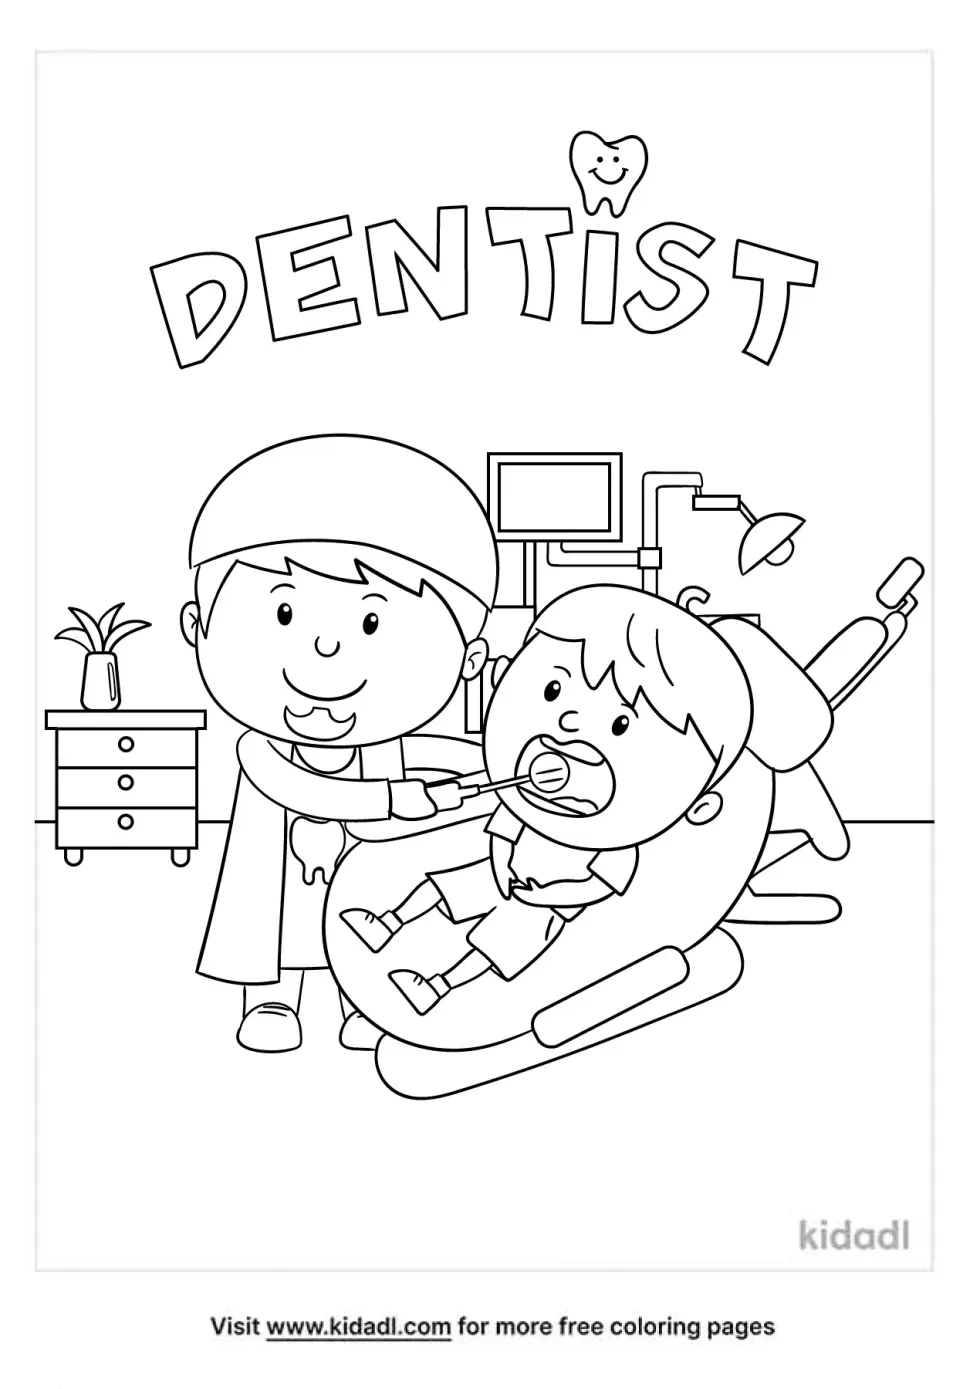 Dentist Coloring Page